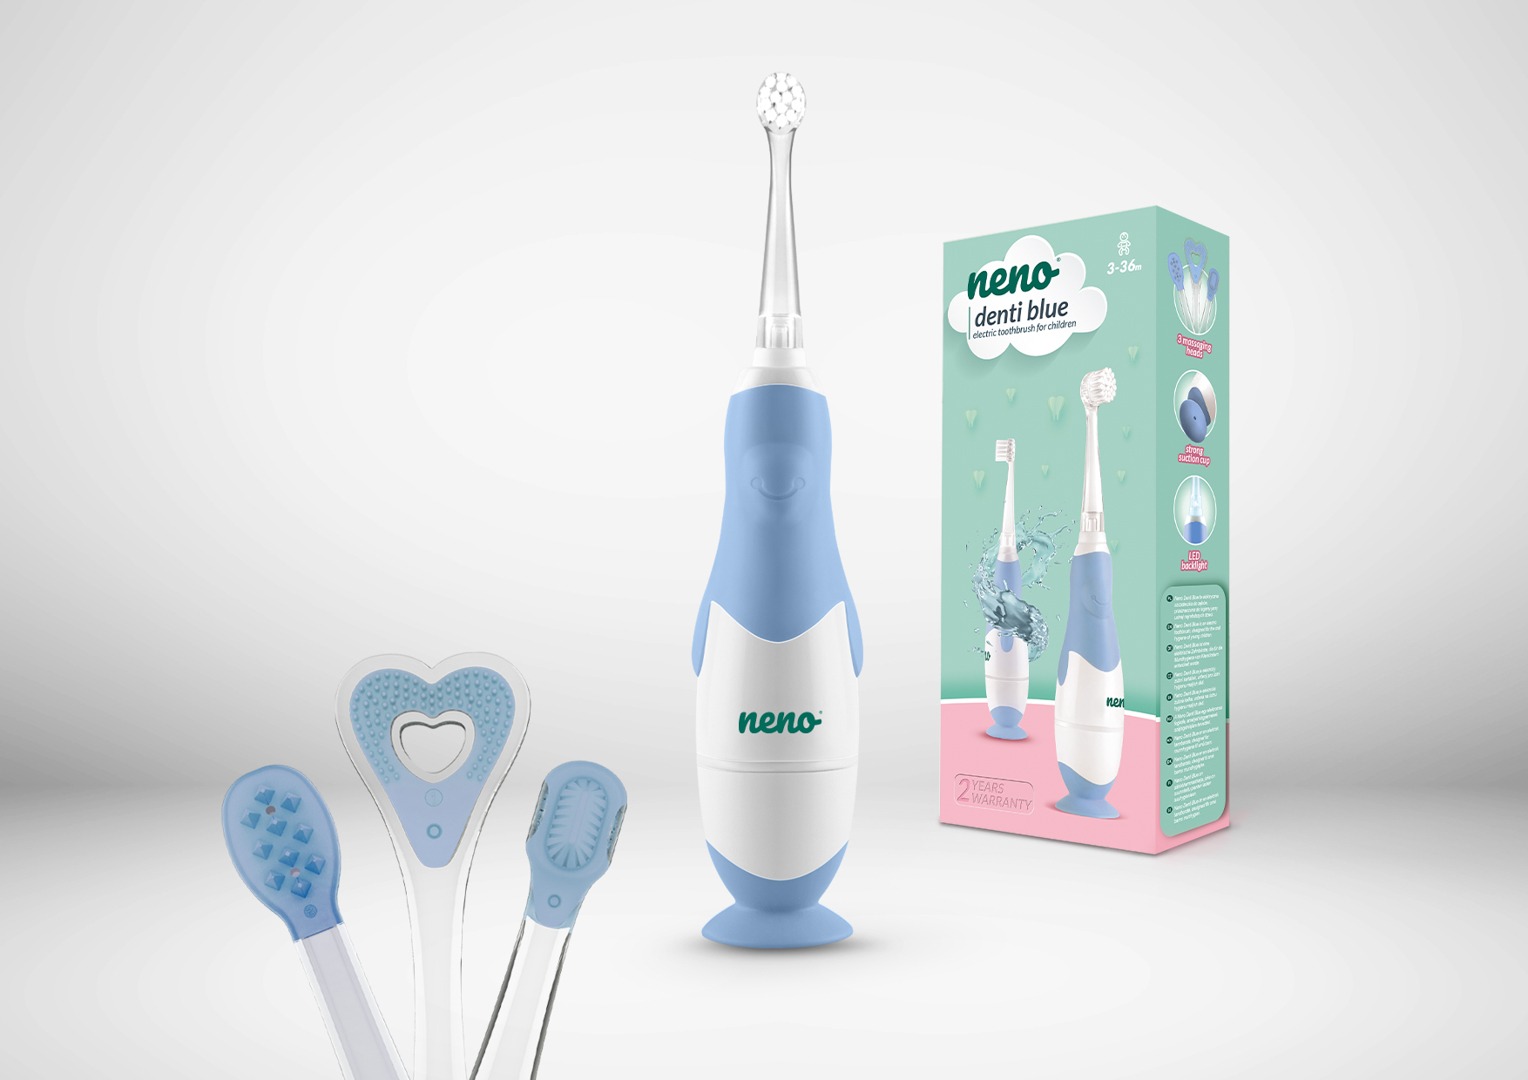 Neno Denti toothbrush for cleaning teeth